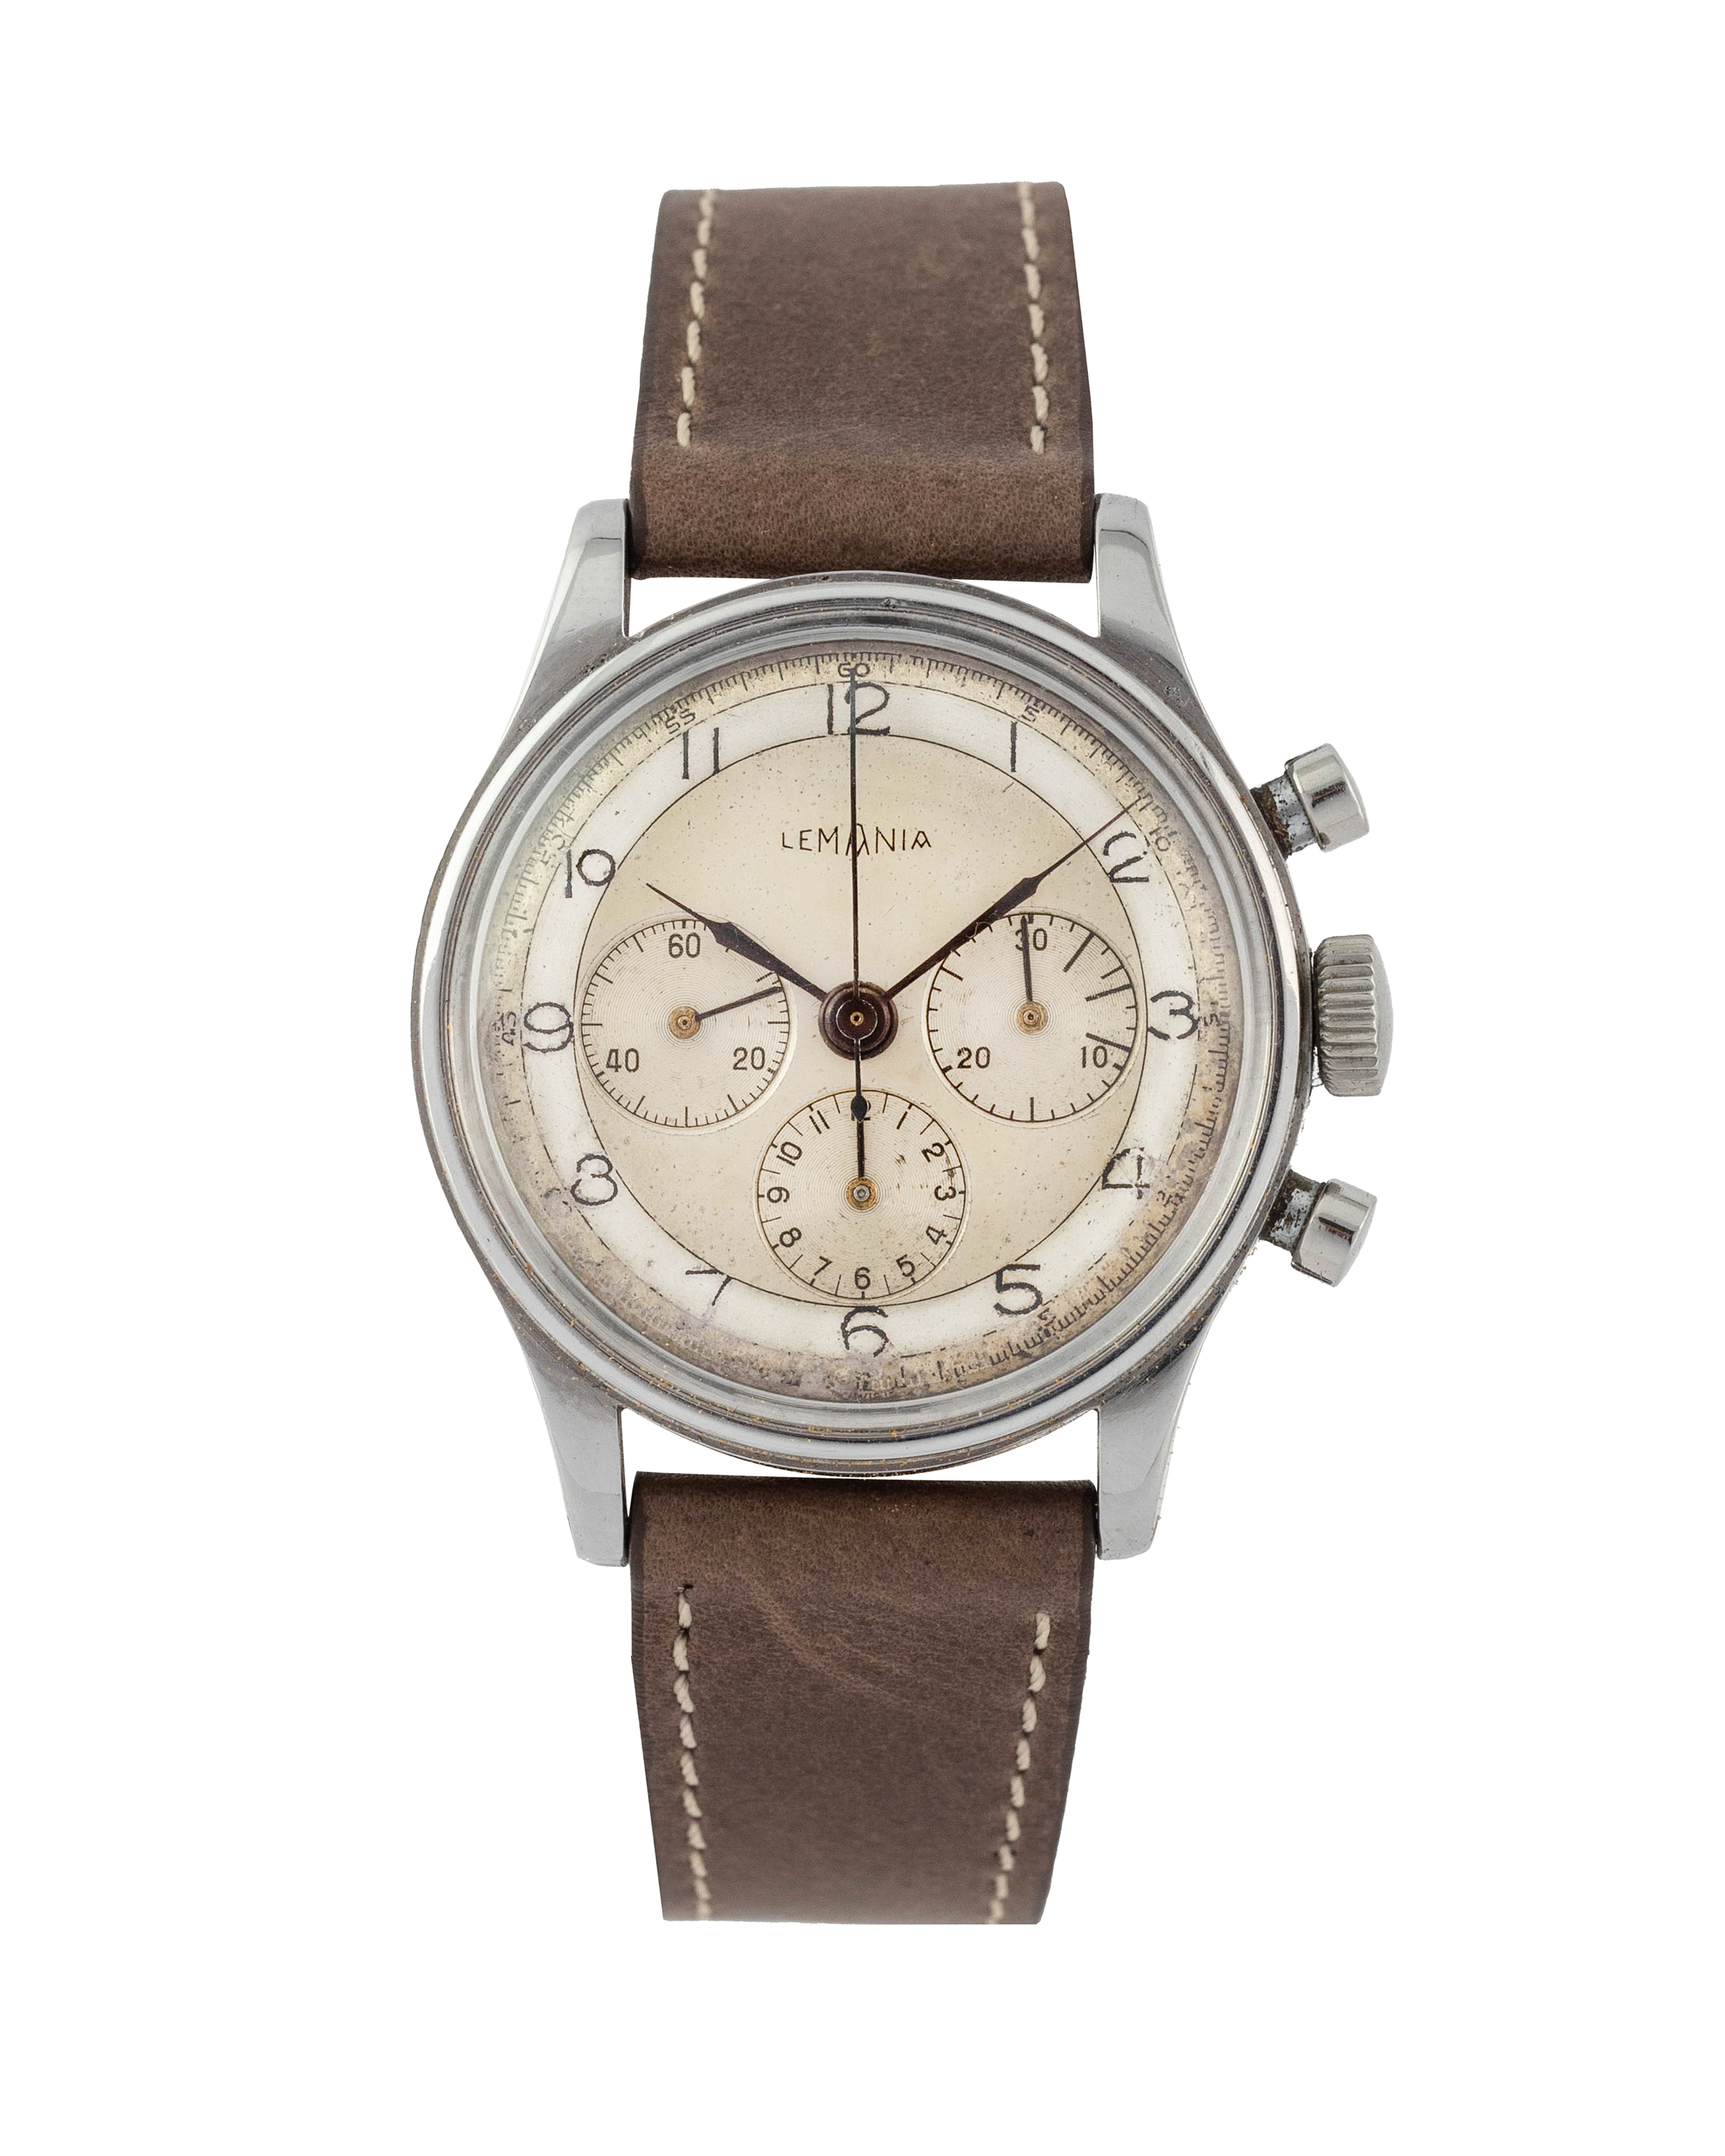 Lemania Ref. 6789 Chronograph wrist watch, two tone dial in stainless steel 